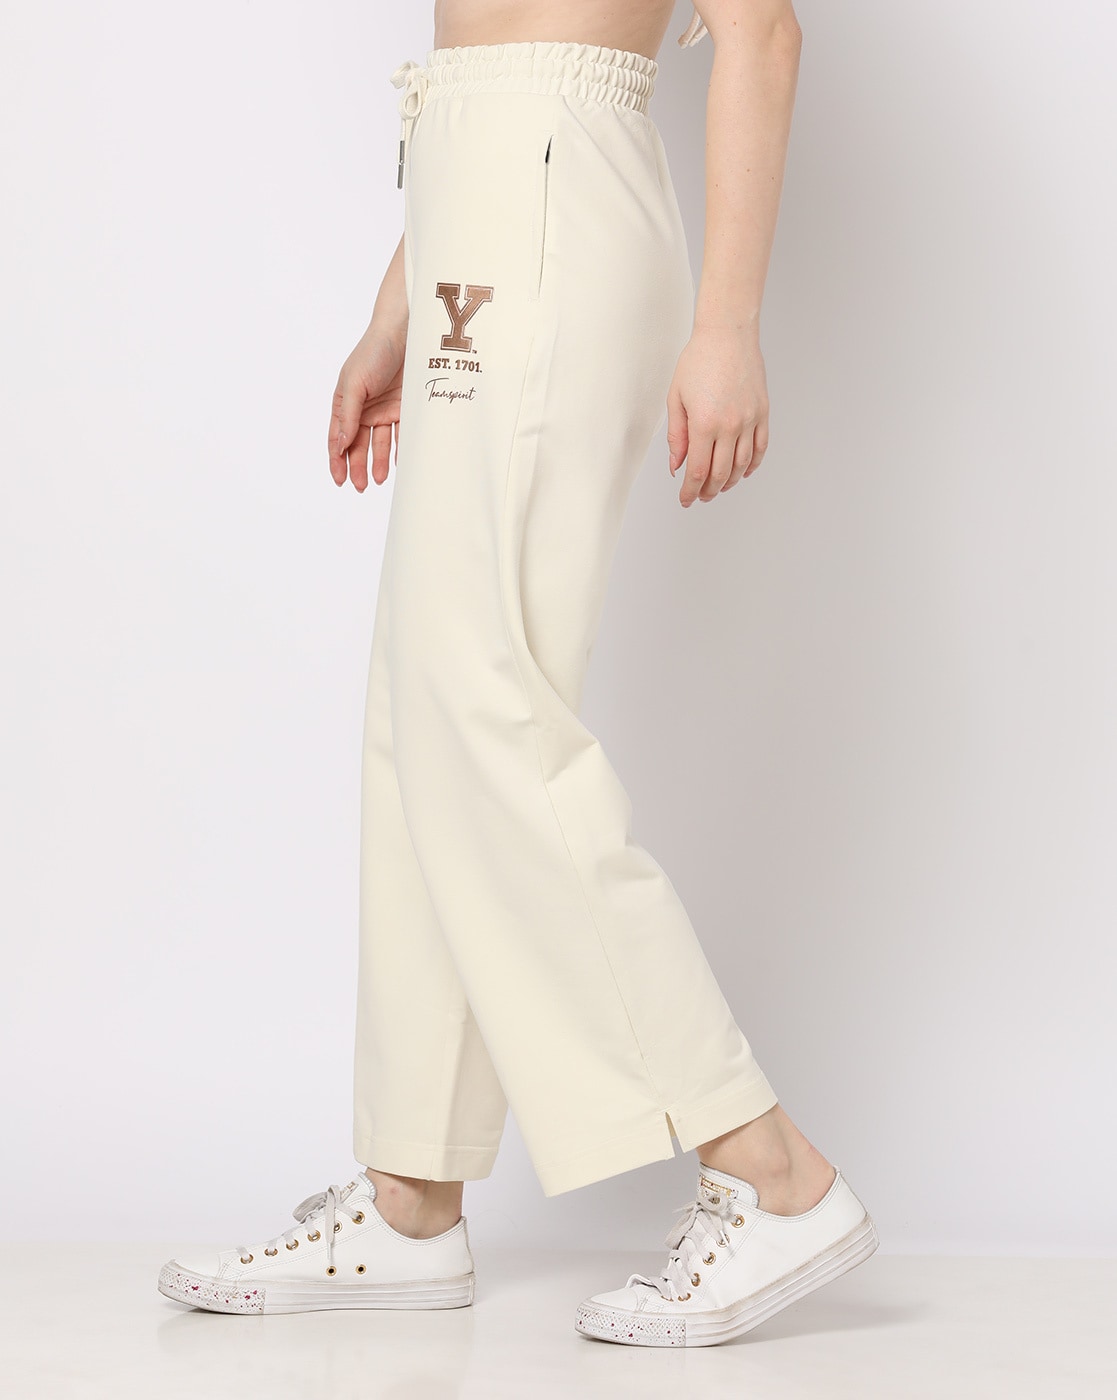 Buy Off-White Track Pants for Women by Teamspirit Online